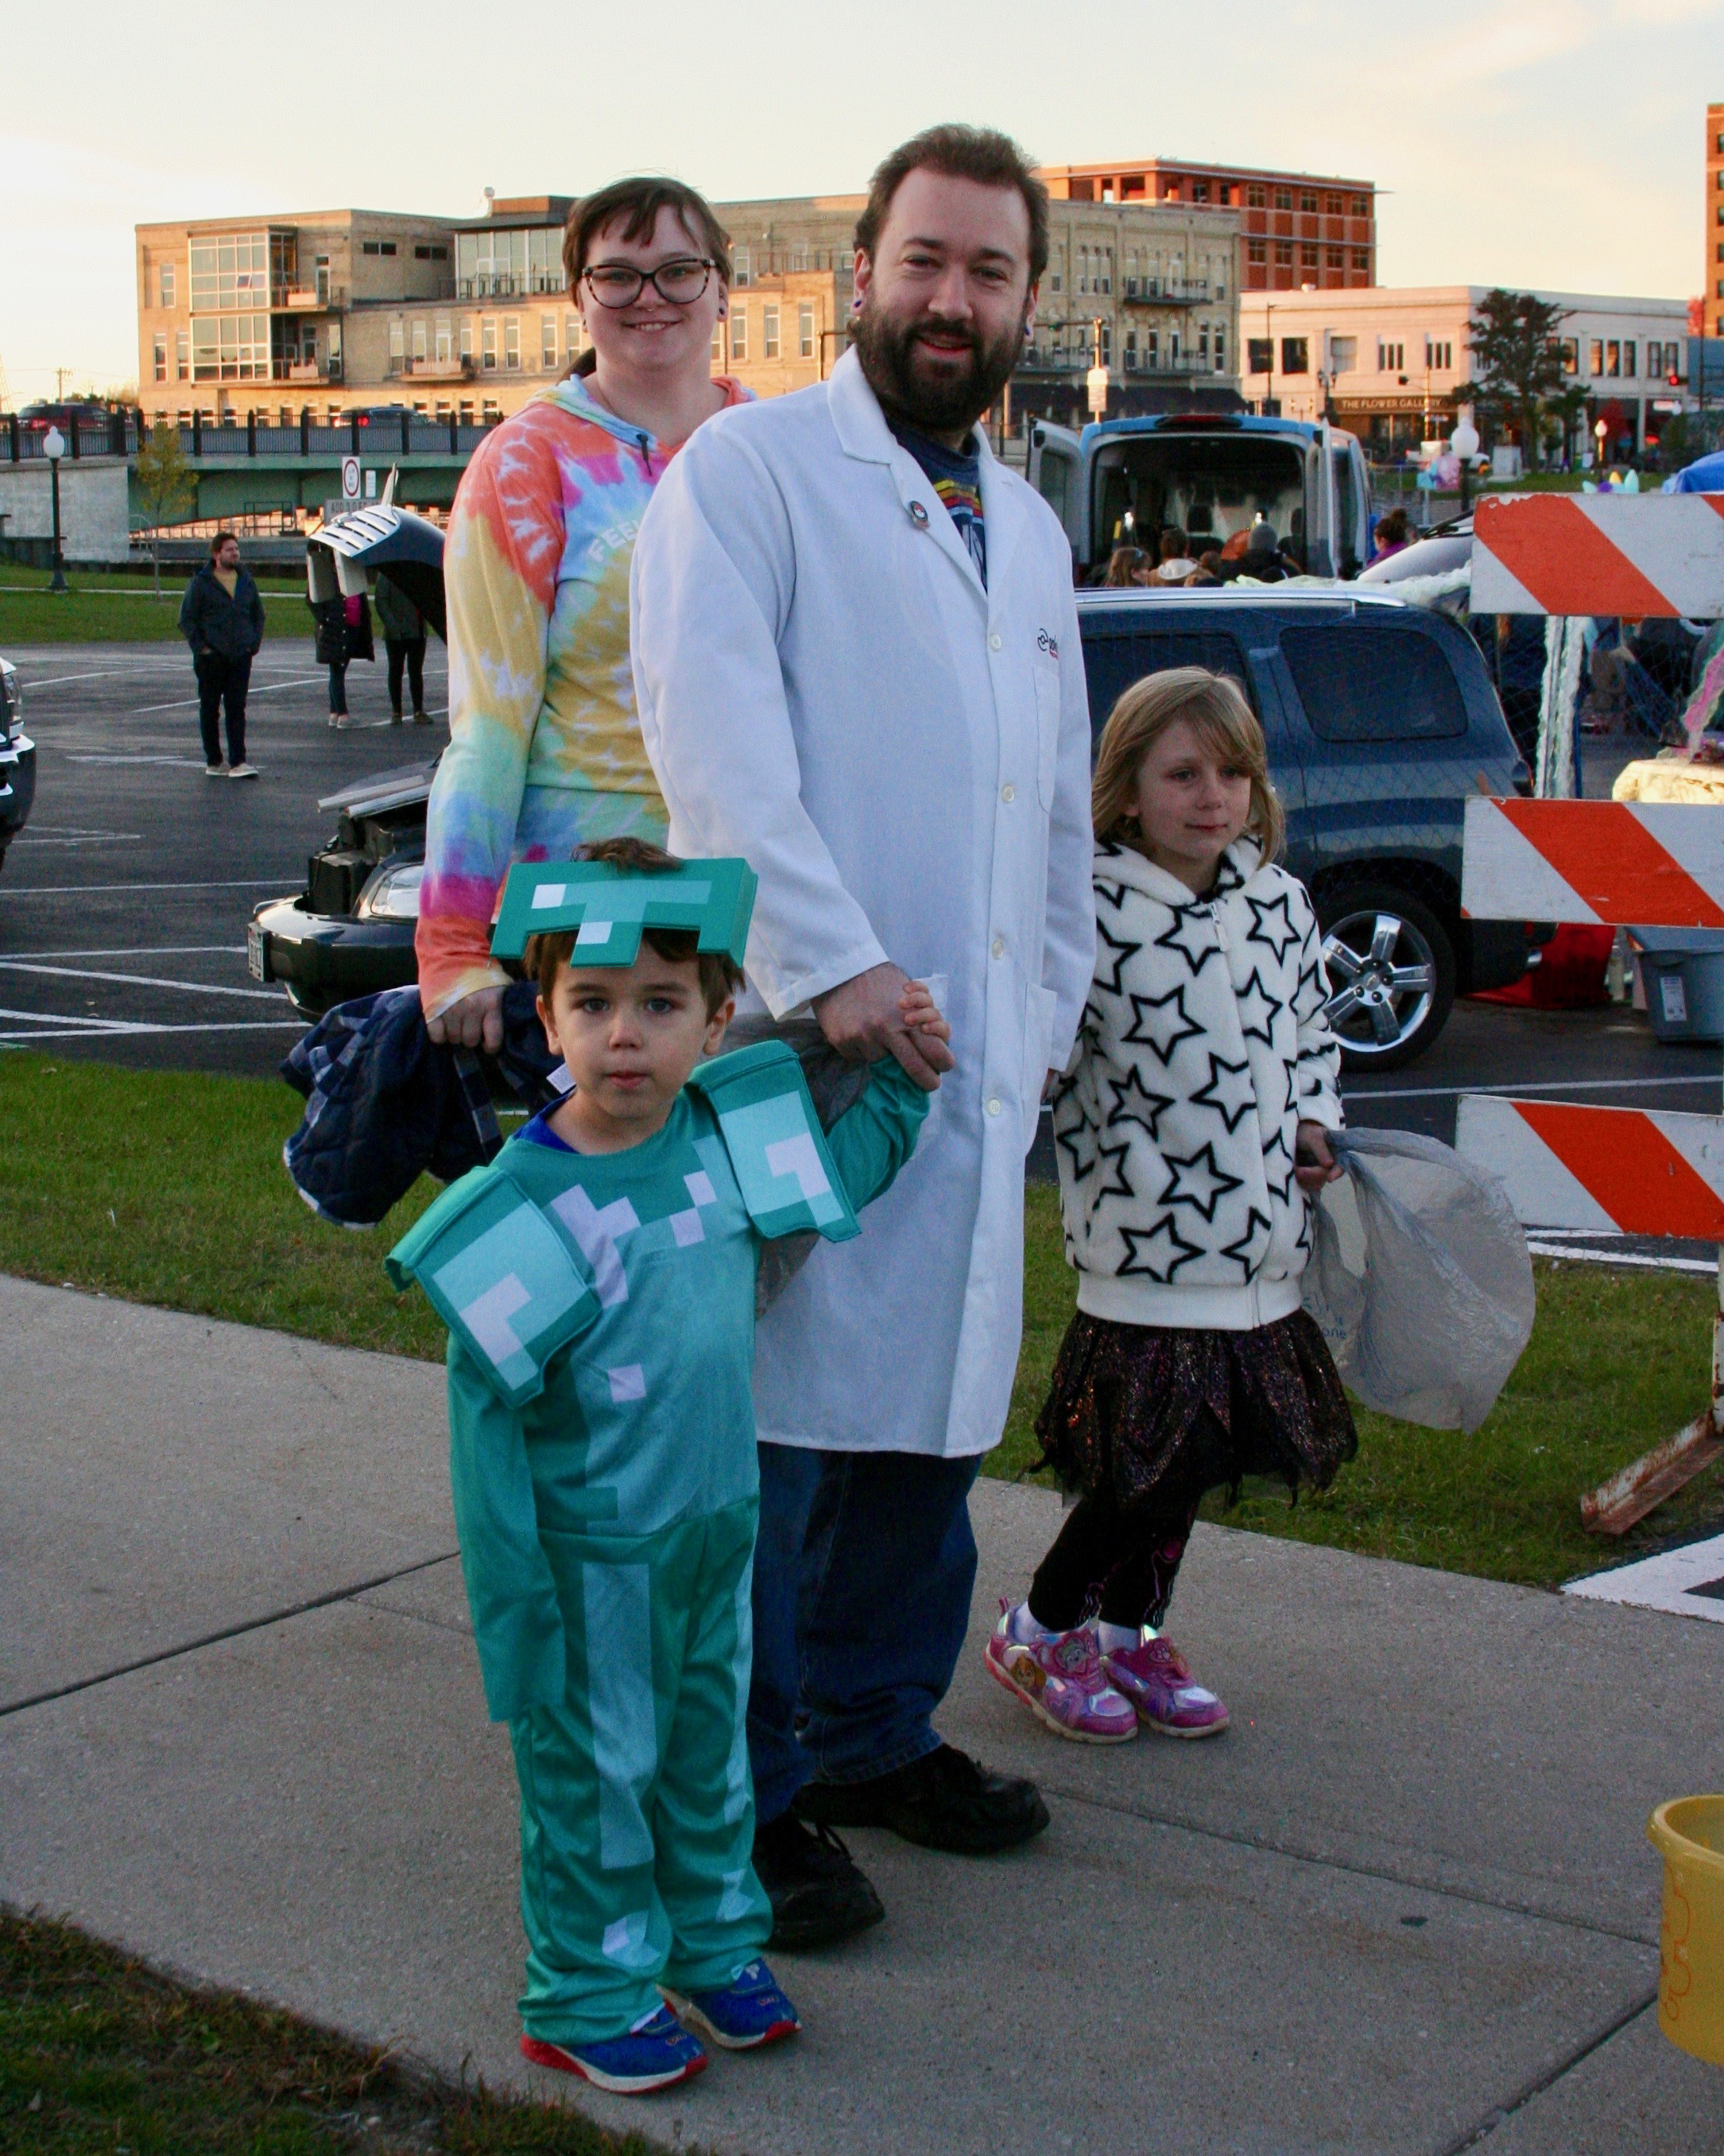 Costumed family at event